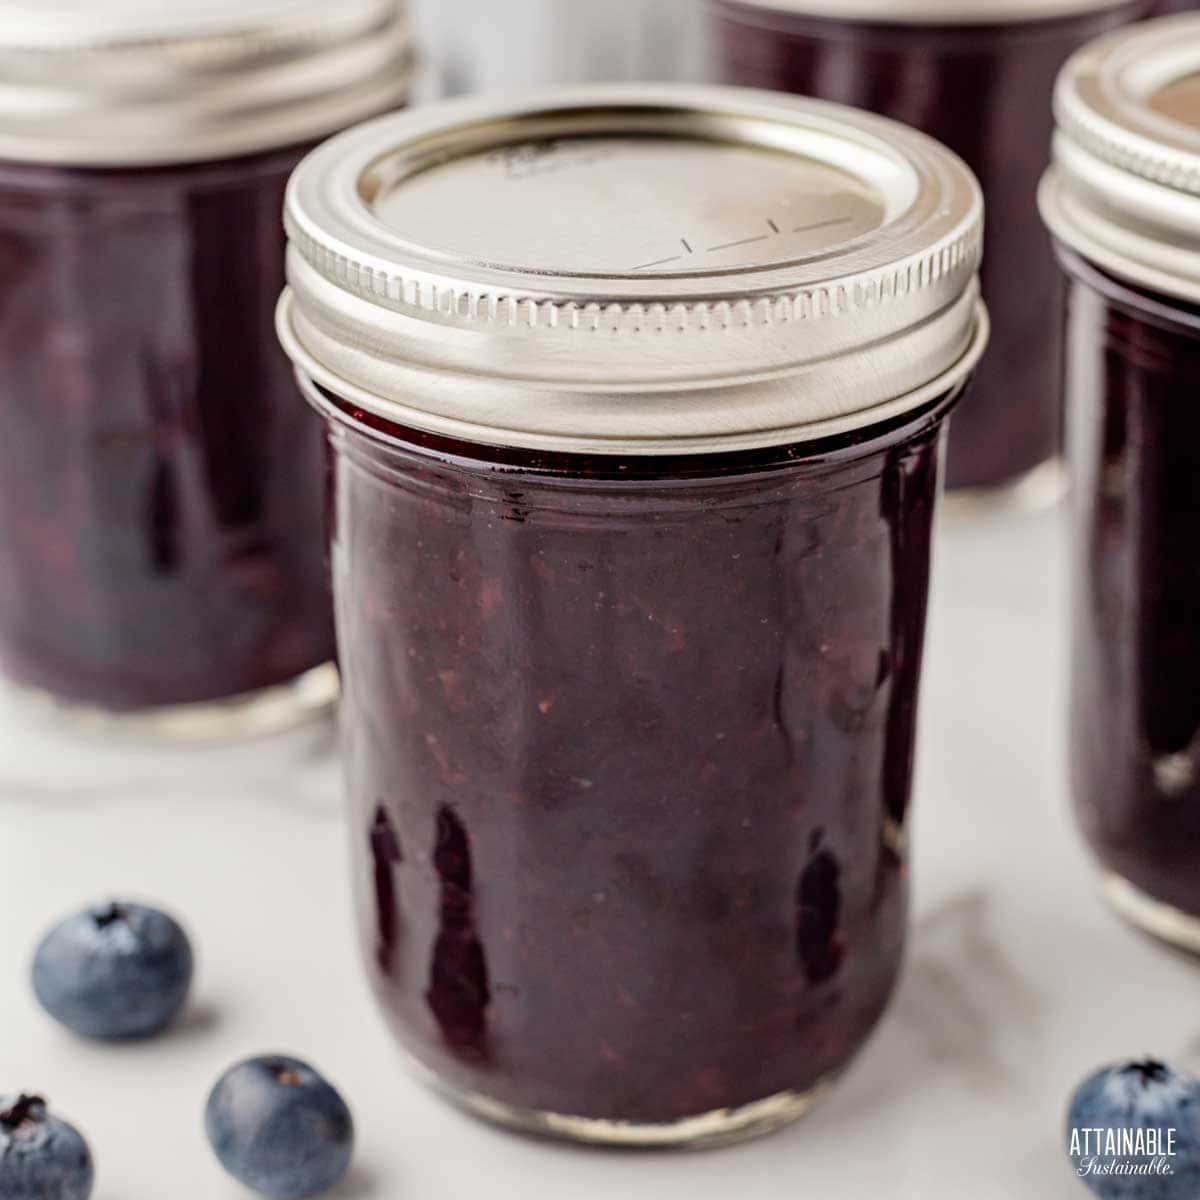 jar of blueberry jam with lid and ring in place.